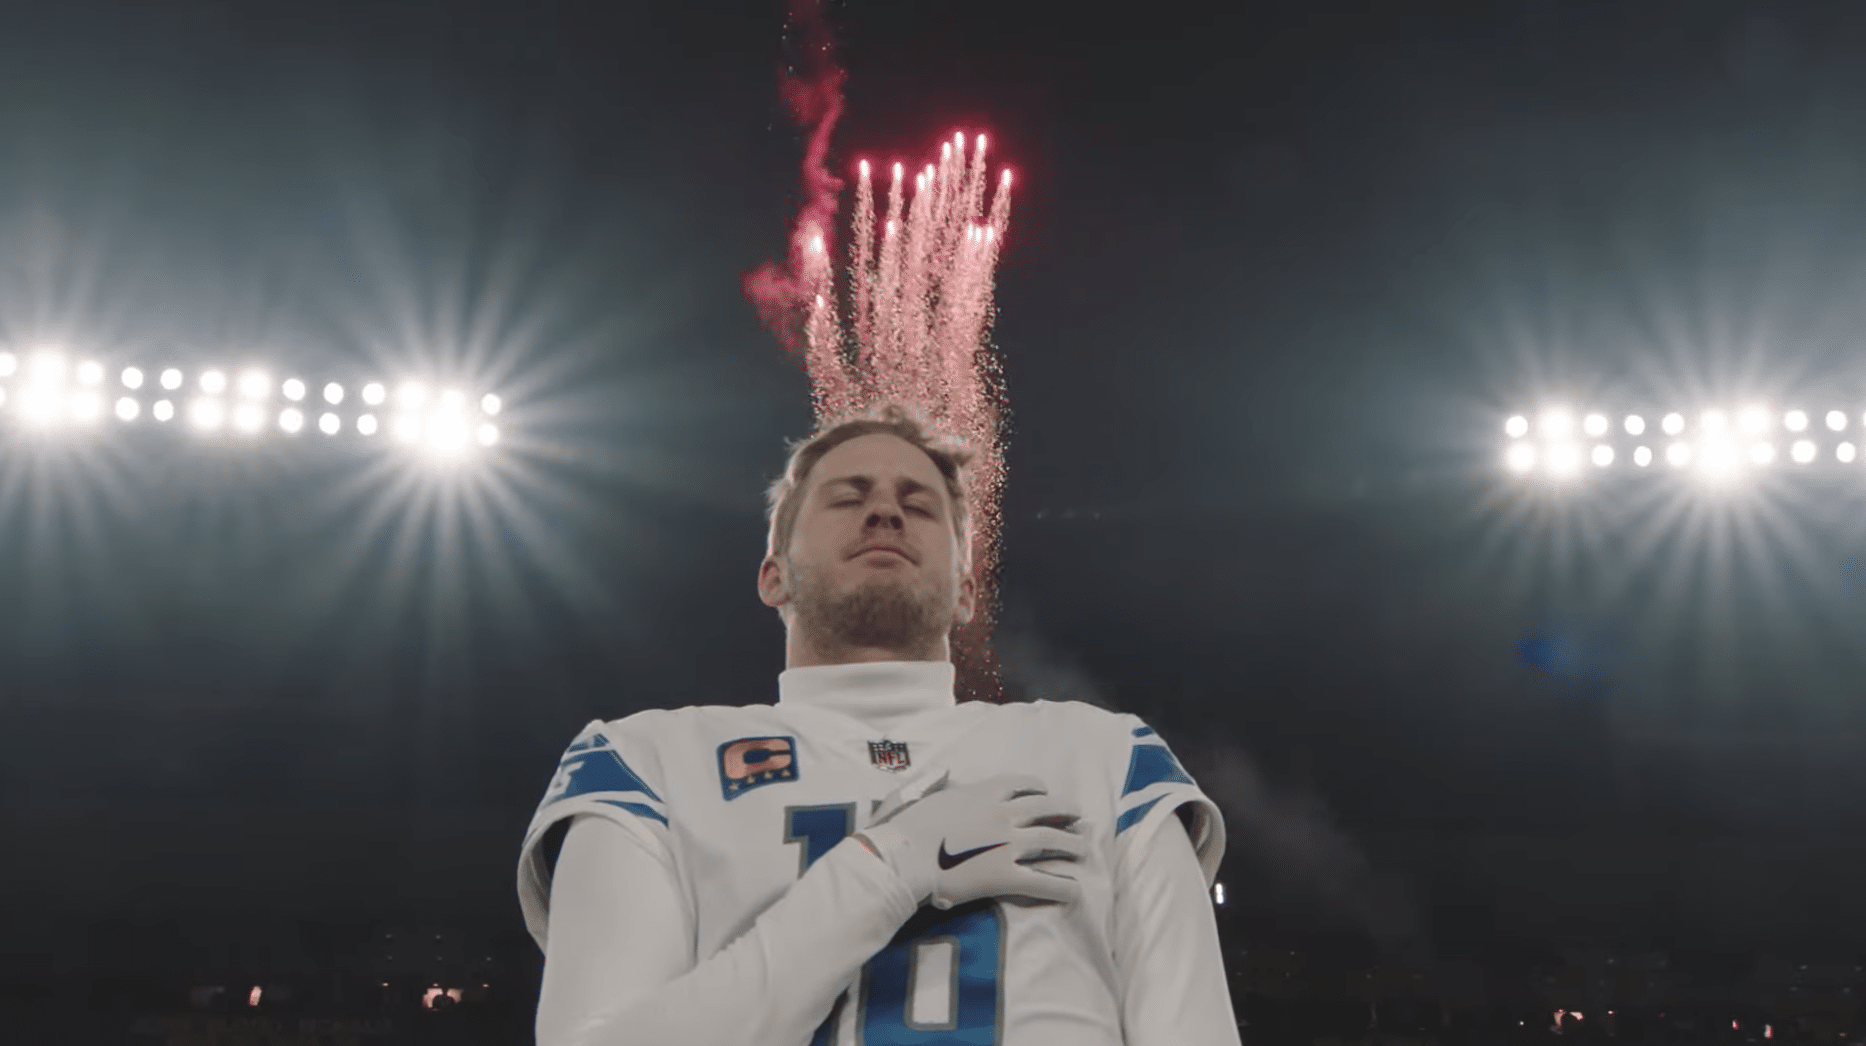 2023 Detroit Lions Depth chart Super Bowl Jared Goff 2023 NFL Draft Peter King Perfect Season NFL MVP Detroit Lions Training Camp Roster Preview Aaron Rodgers